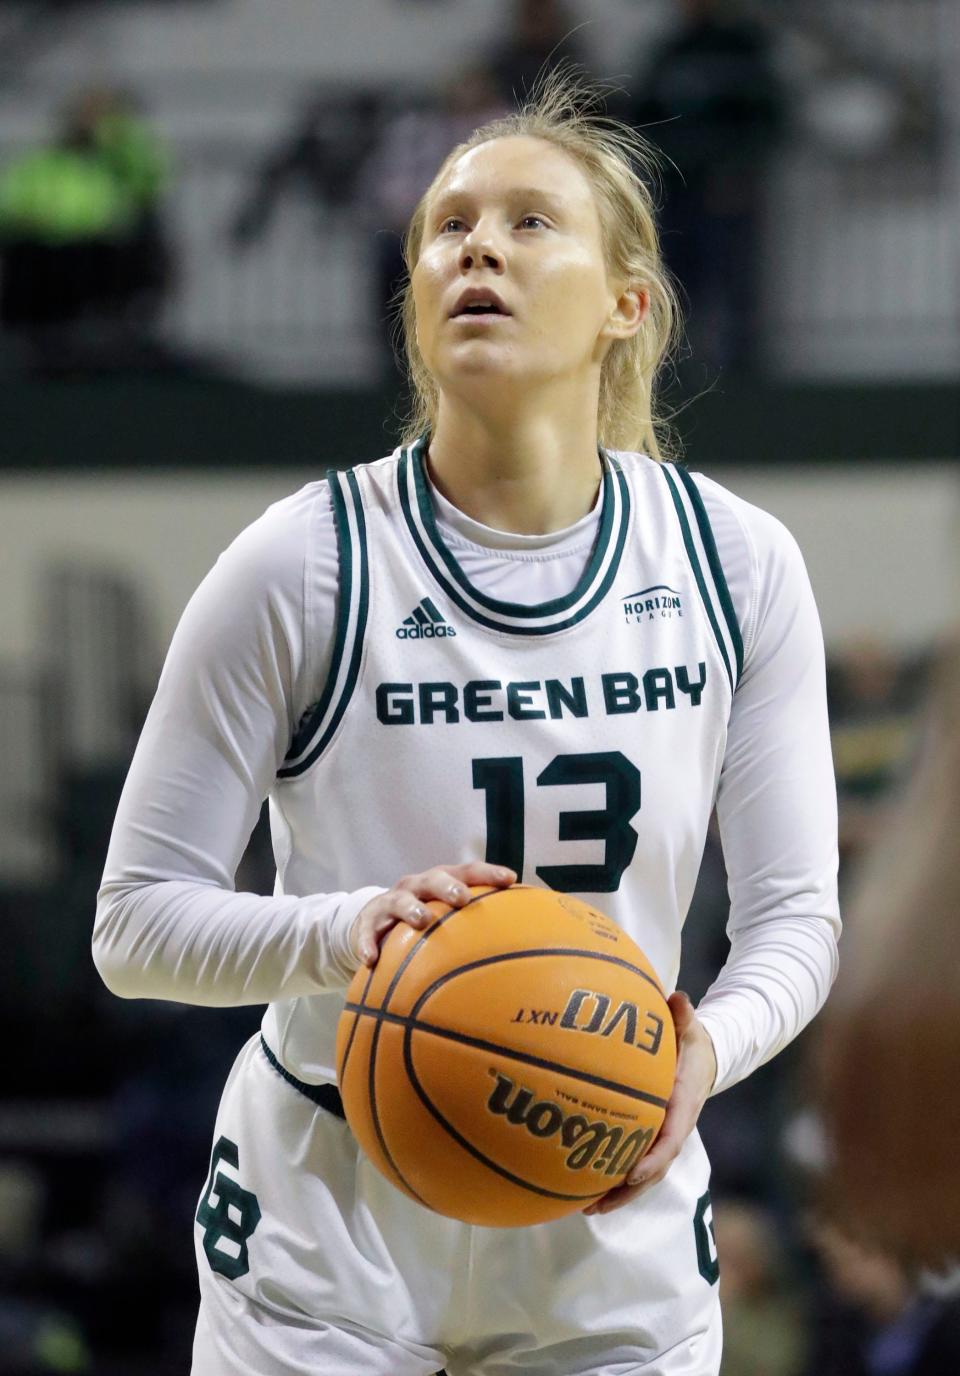 University of Wisconsin-Green Bay Phoenix’s Tatum Koenig sizes up a free throw March 16 against the Niagara Purple Eagles at the Kress Center in Green Bay.